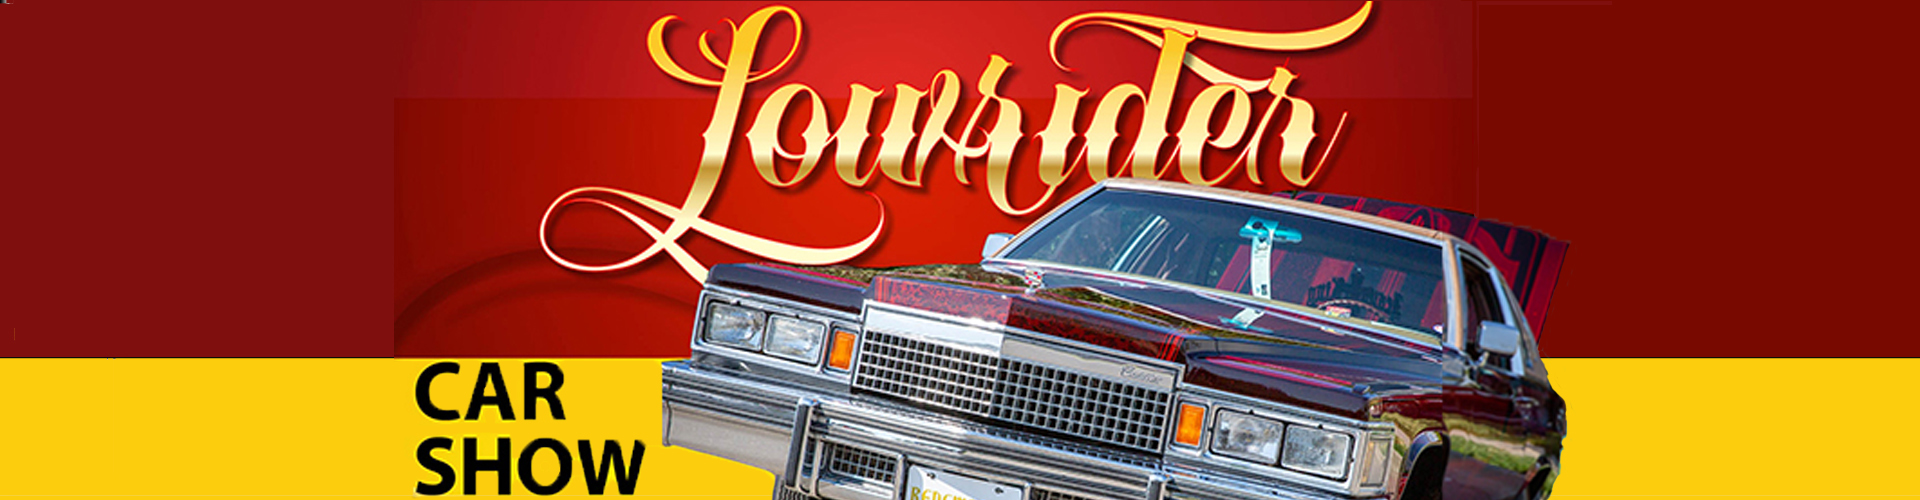 lowrider carshow banner